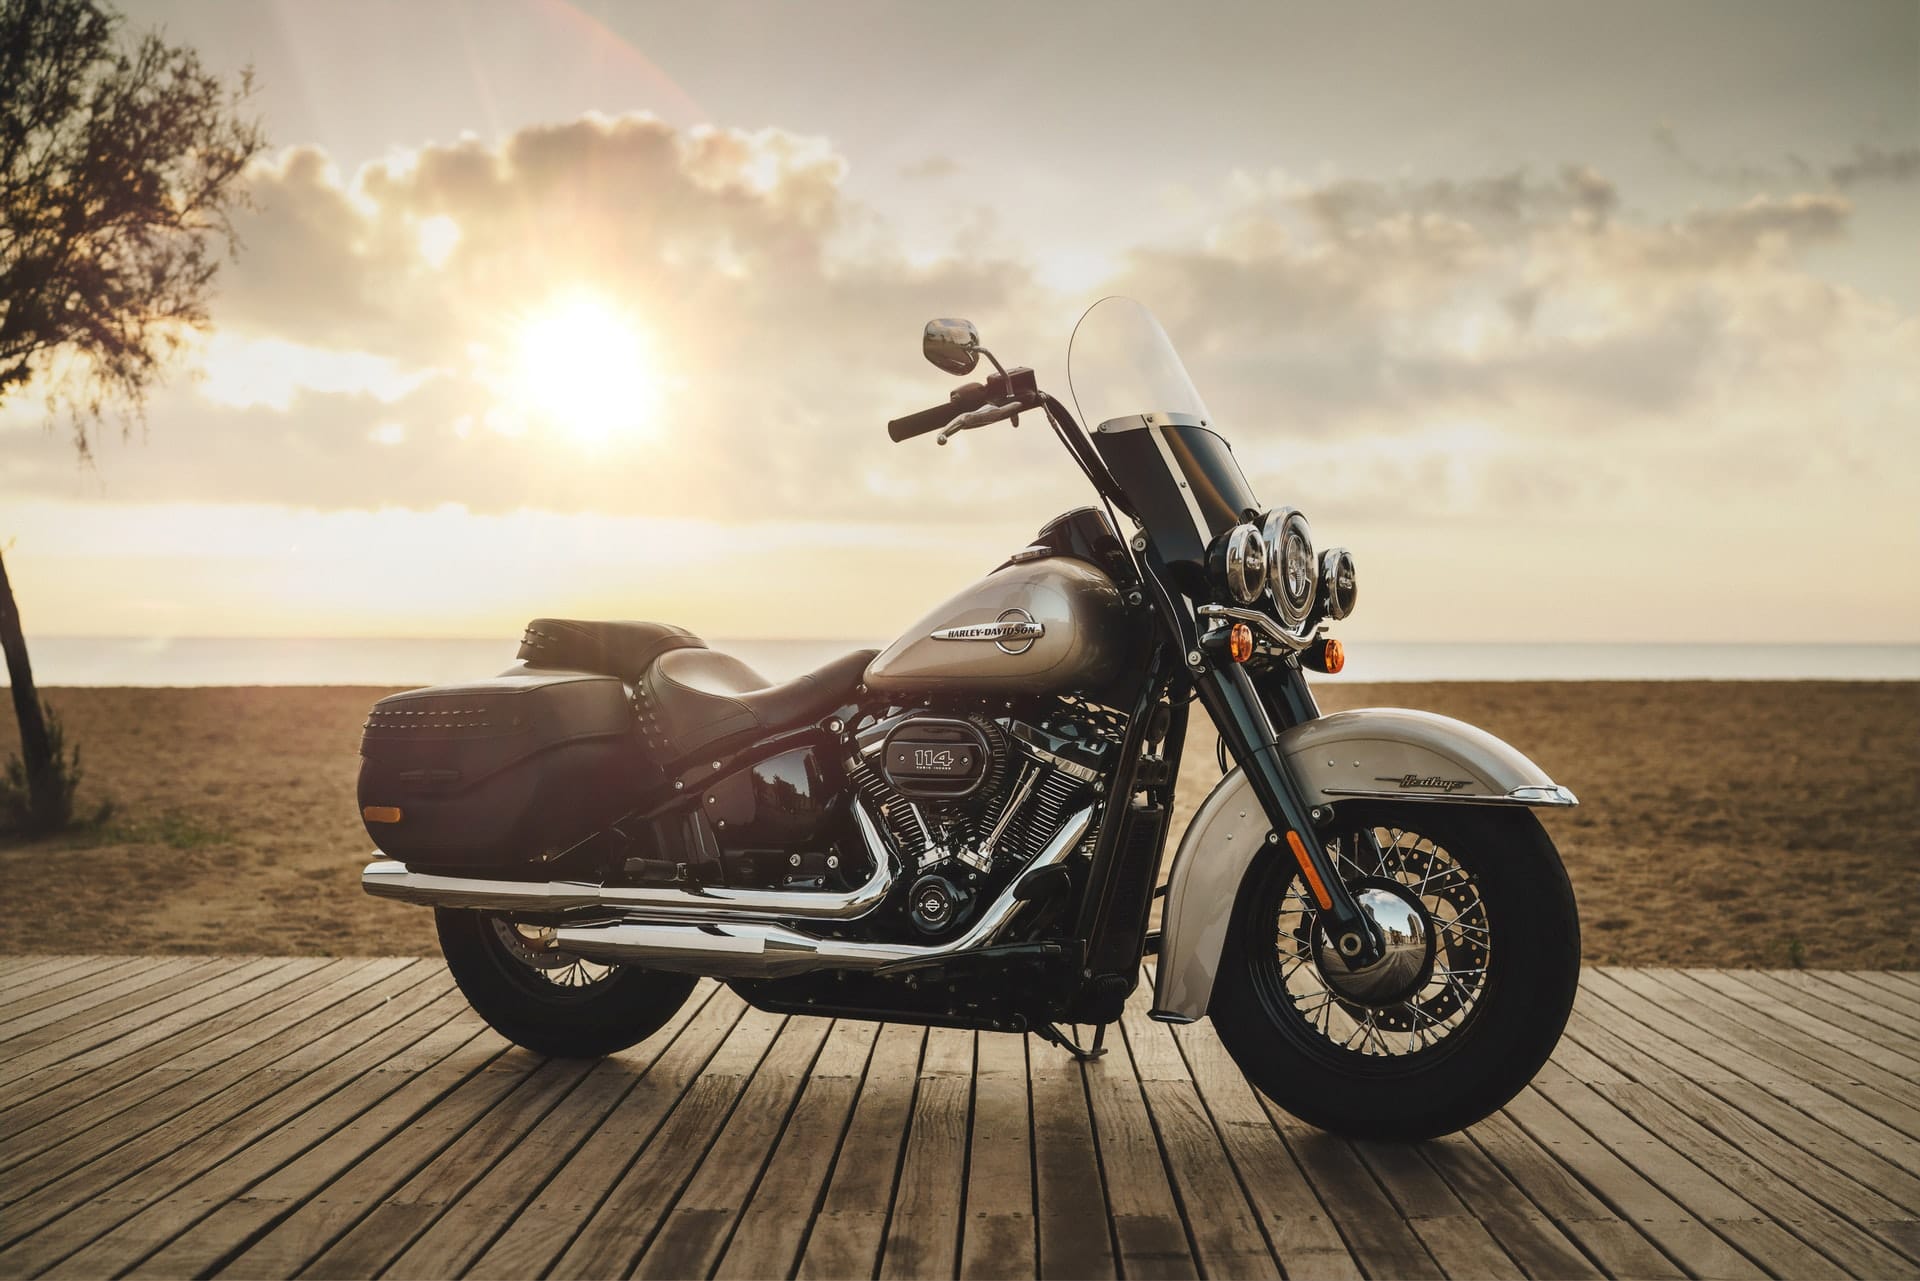 Why Aren’t There More Diesel Motorcycles? [6 Reasons]